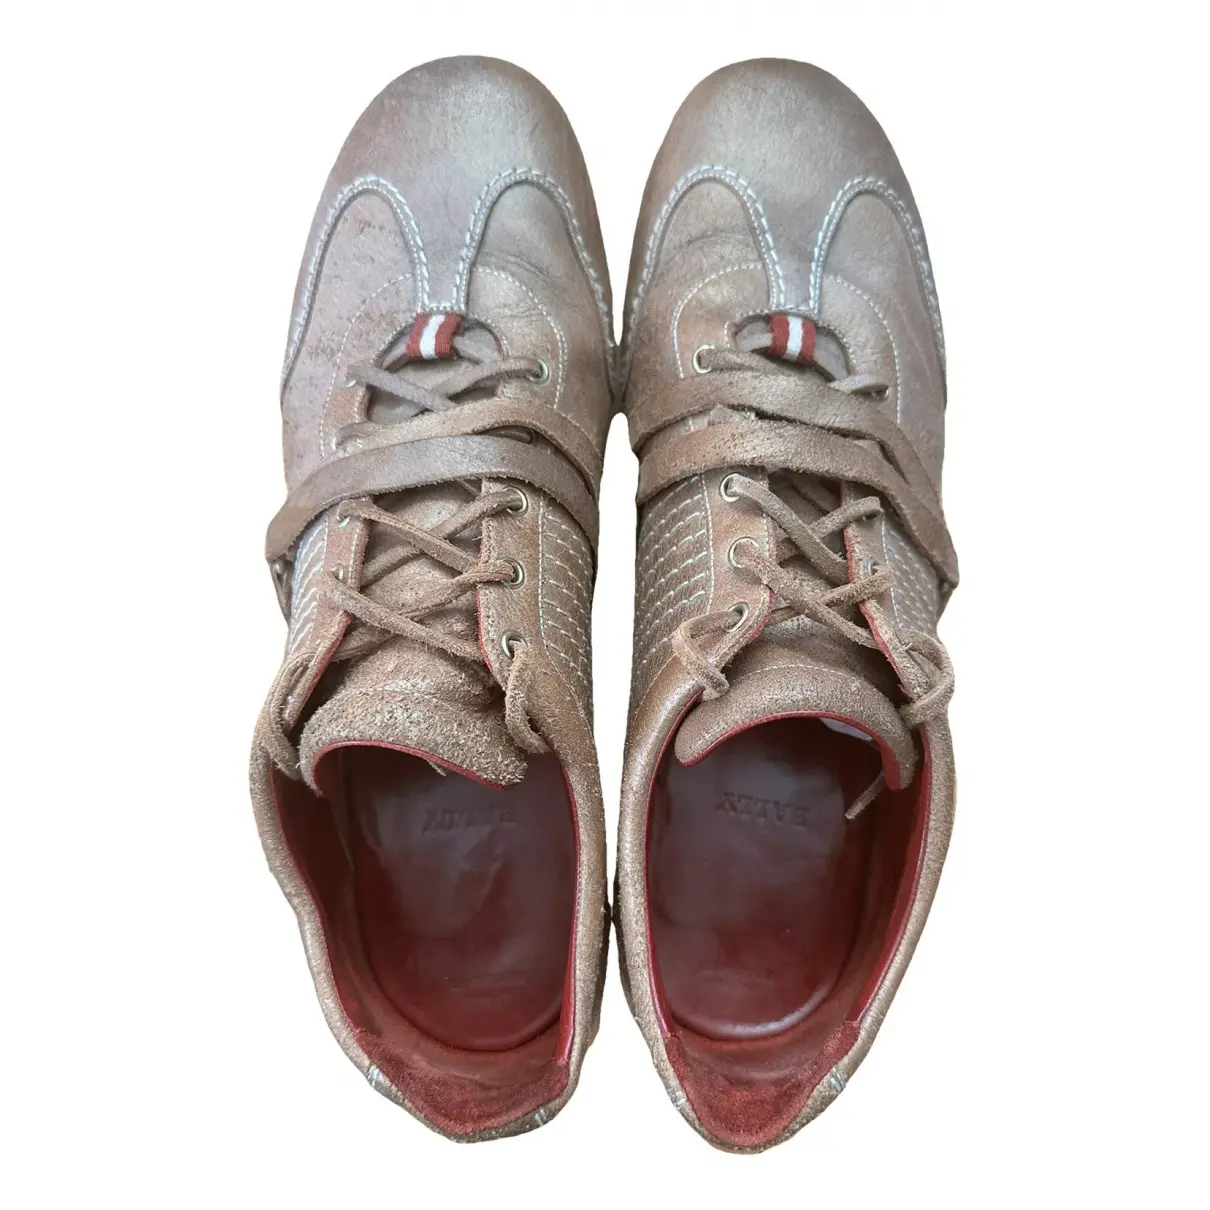 Leather lace ups